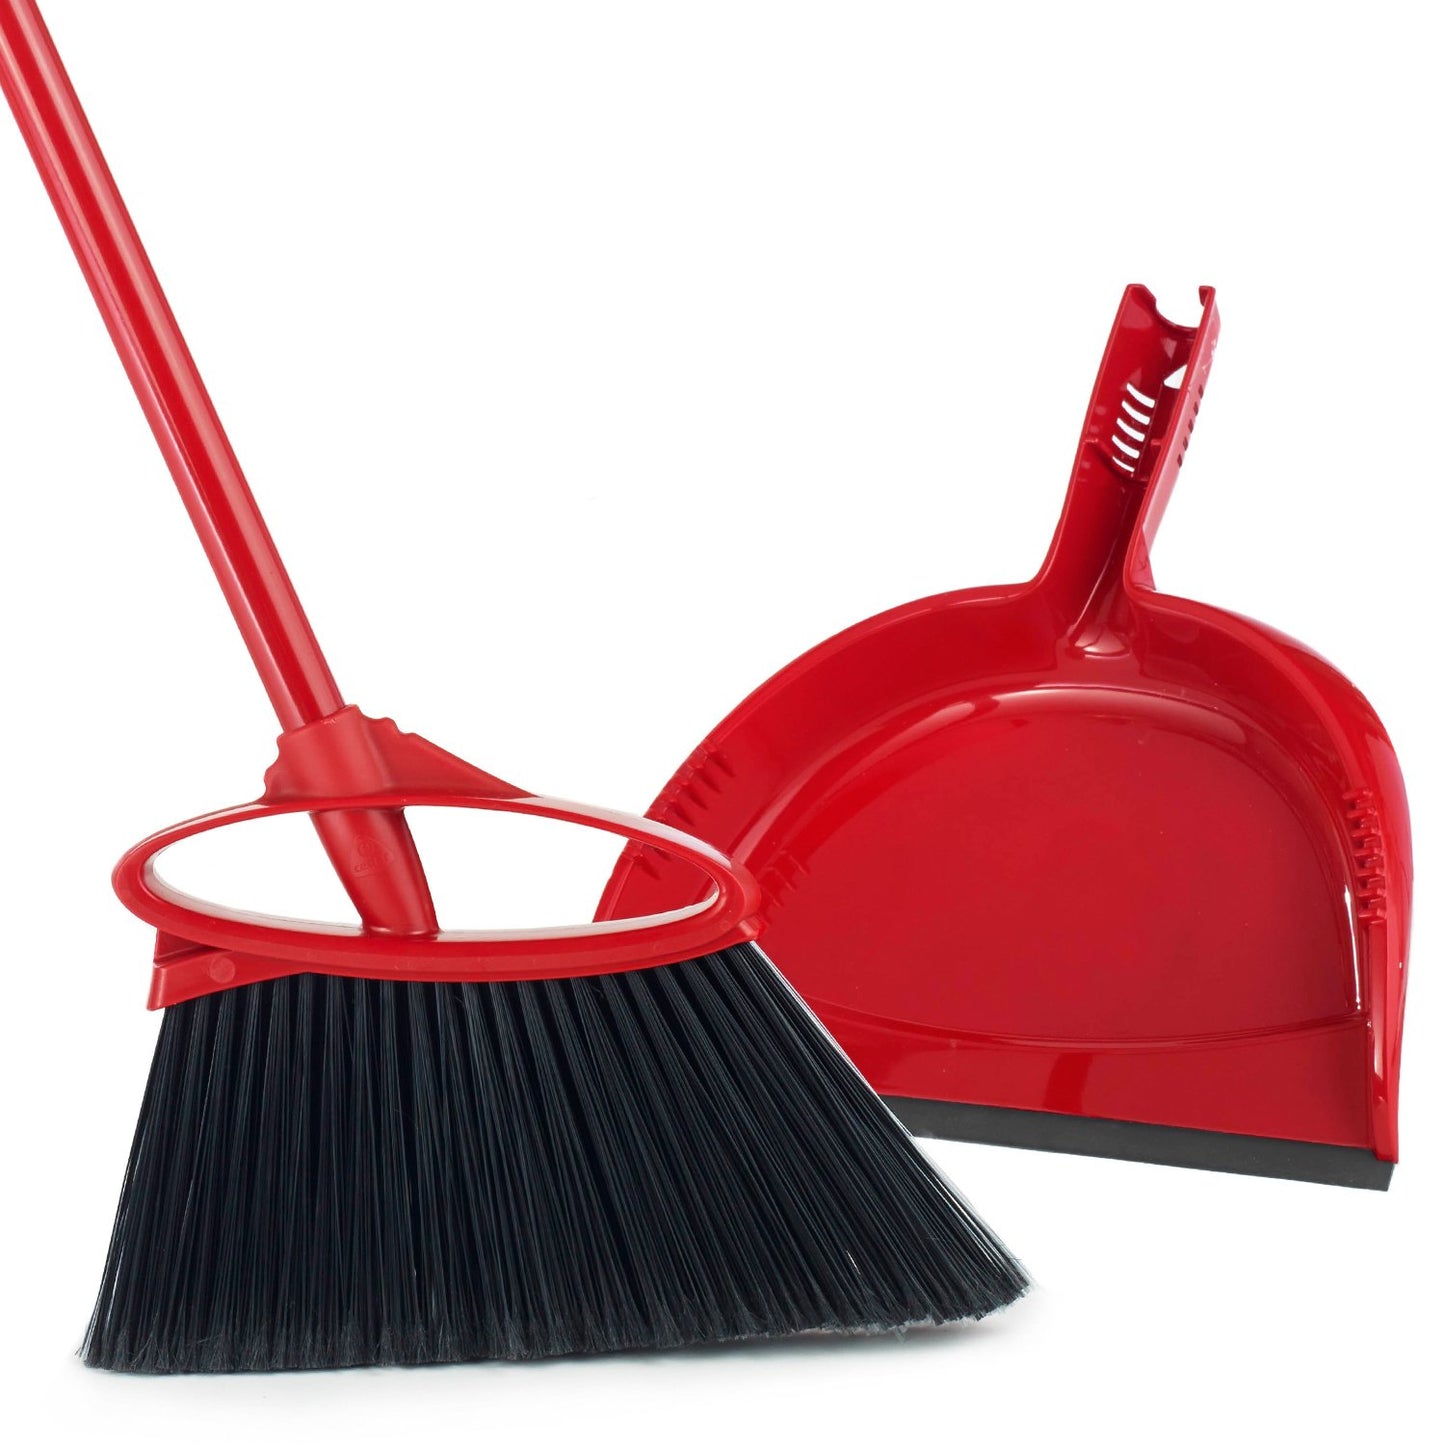 Broom with Dust pan